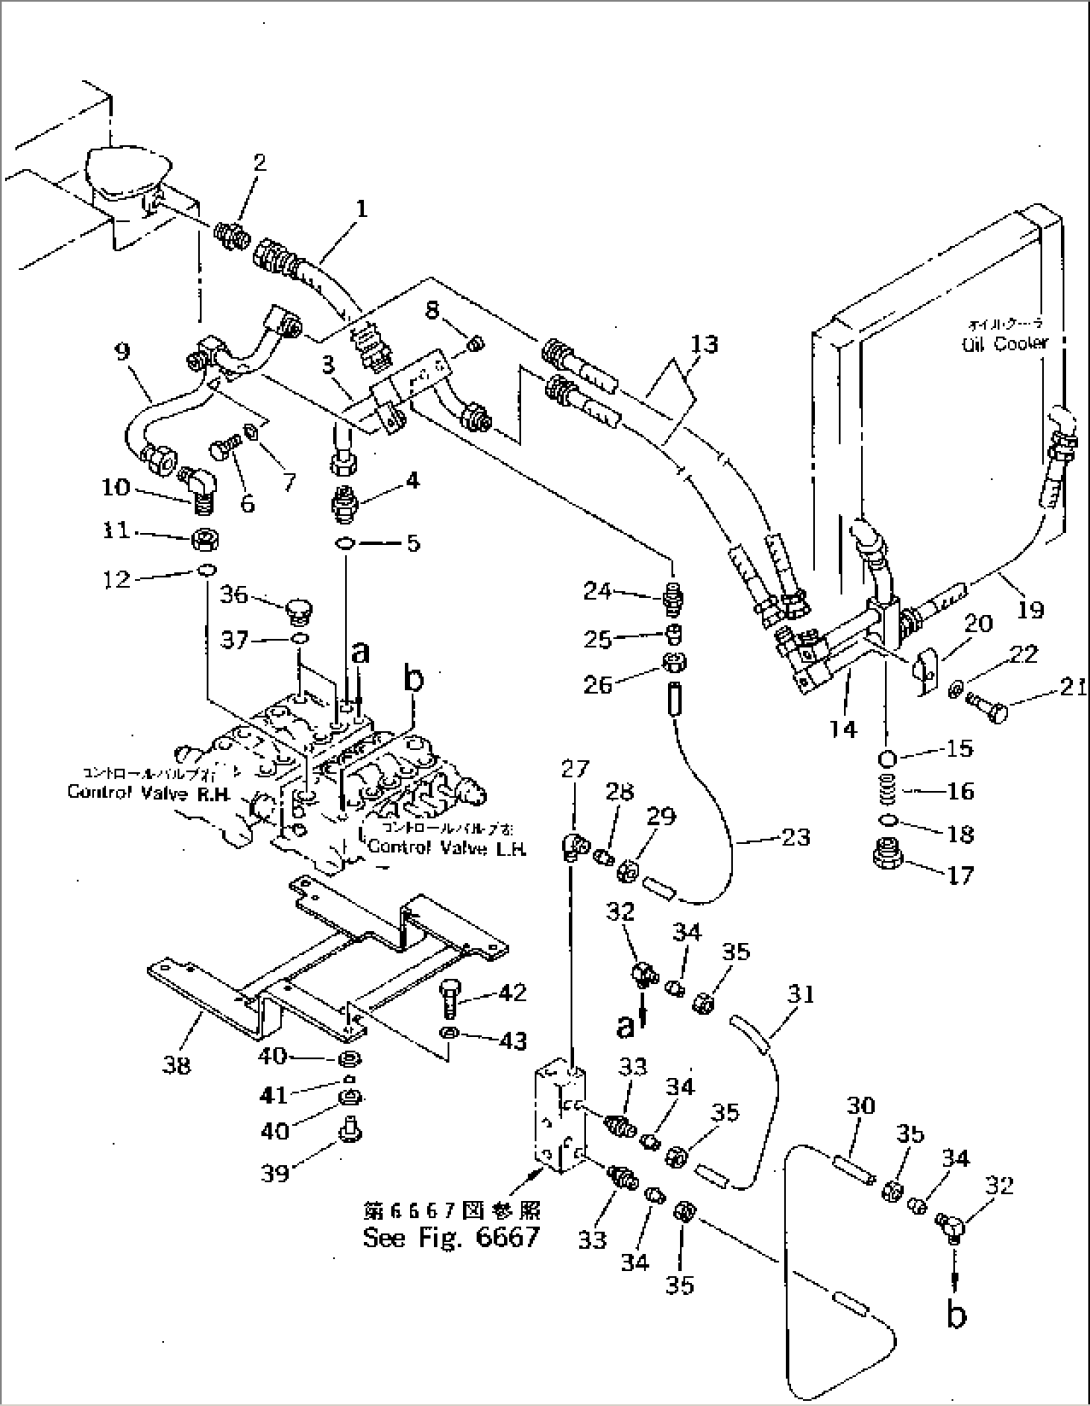 HYDRAULIC PIPING (CONFLUENT ATTACHMENT CIRCUIT)(#1601-1861)